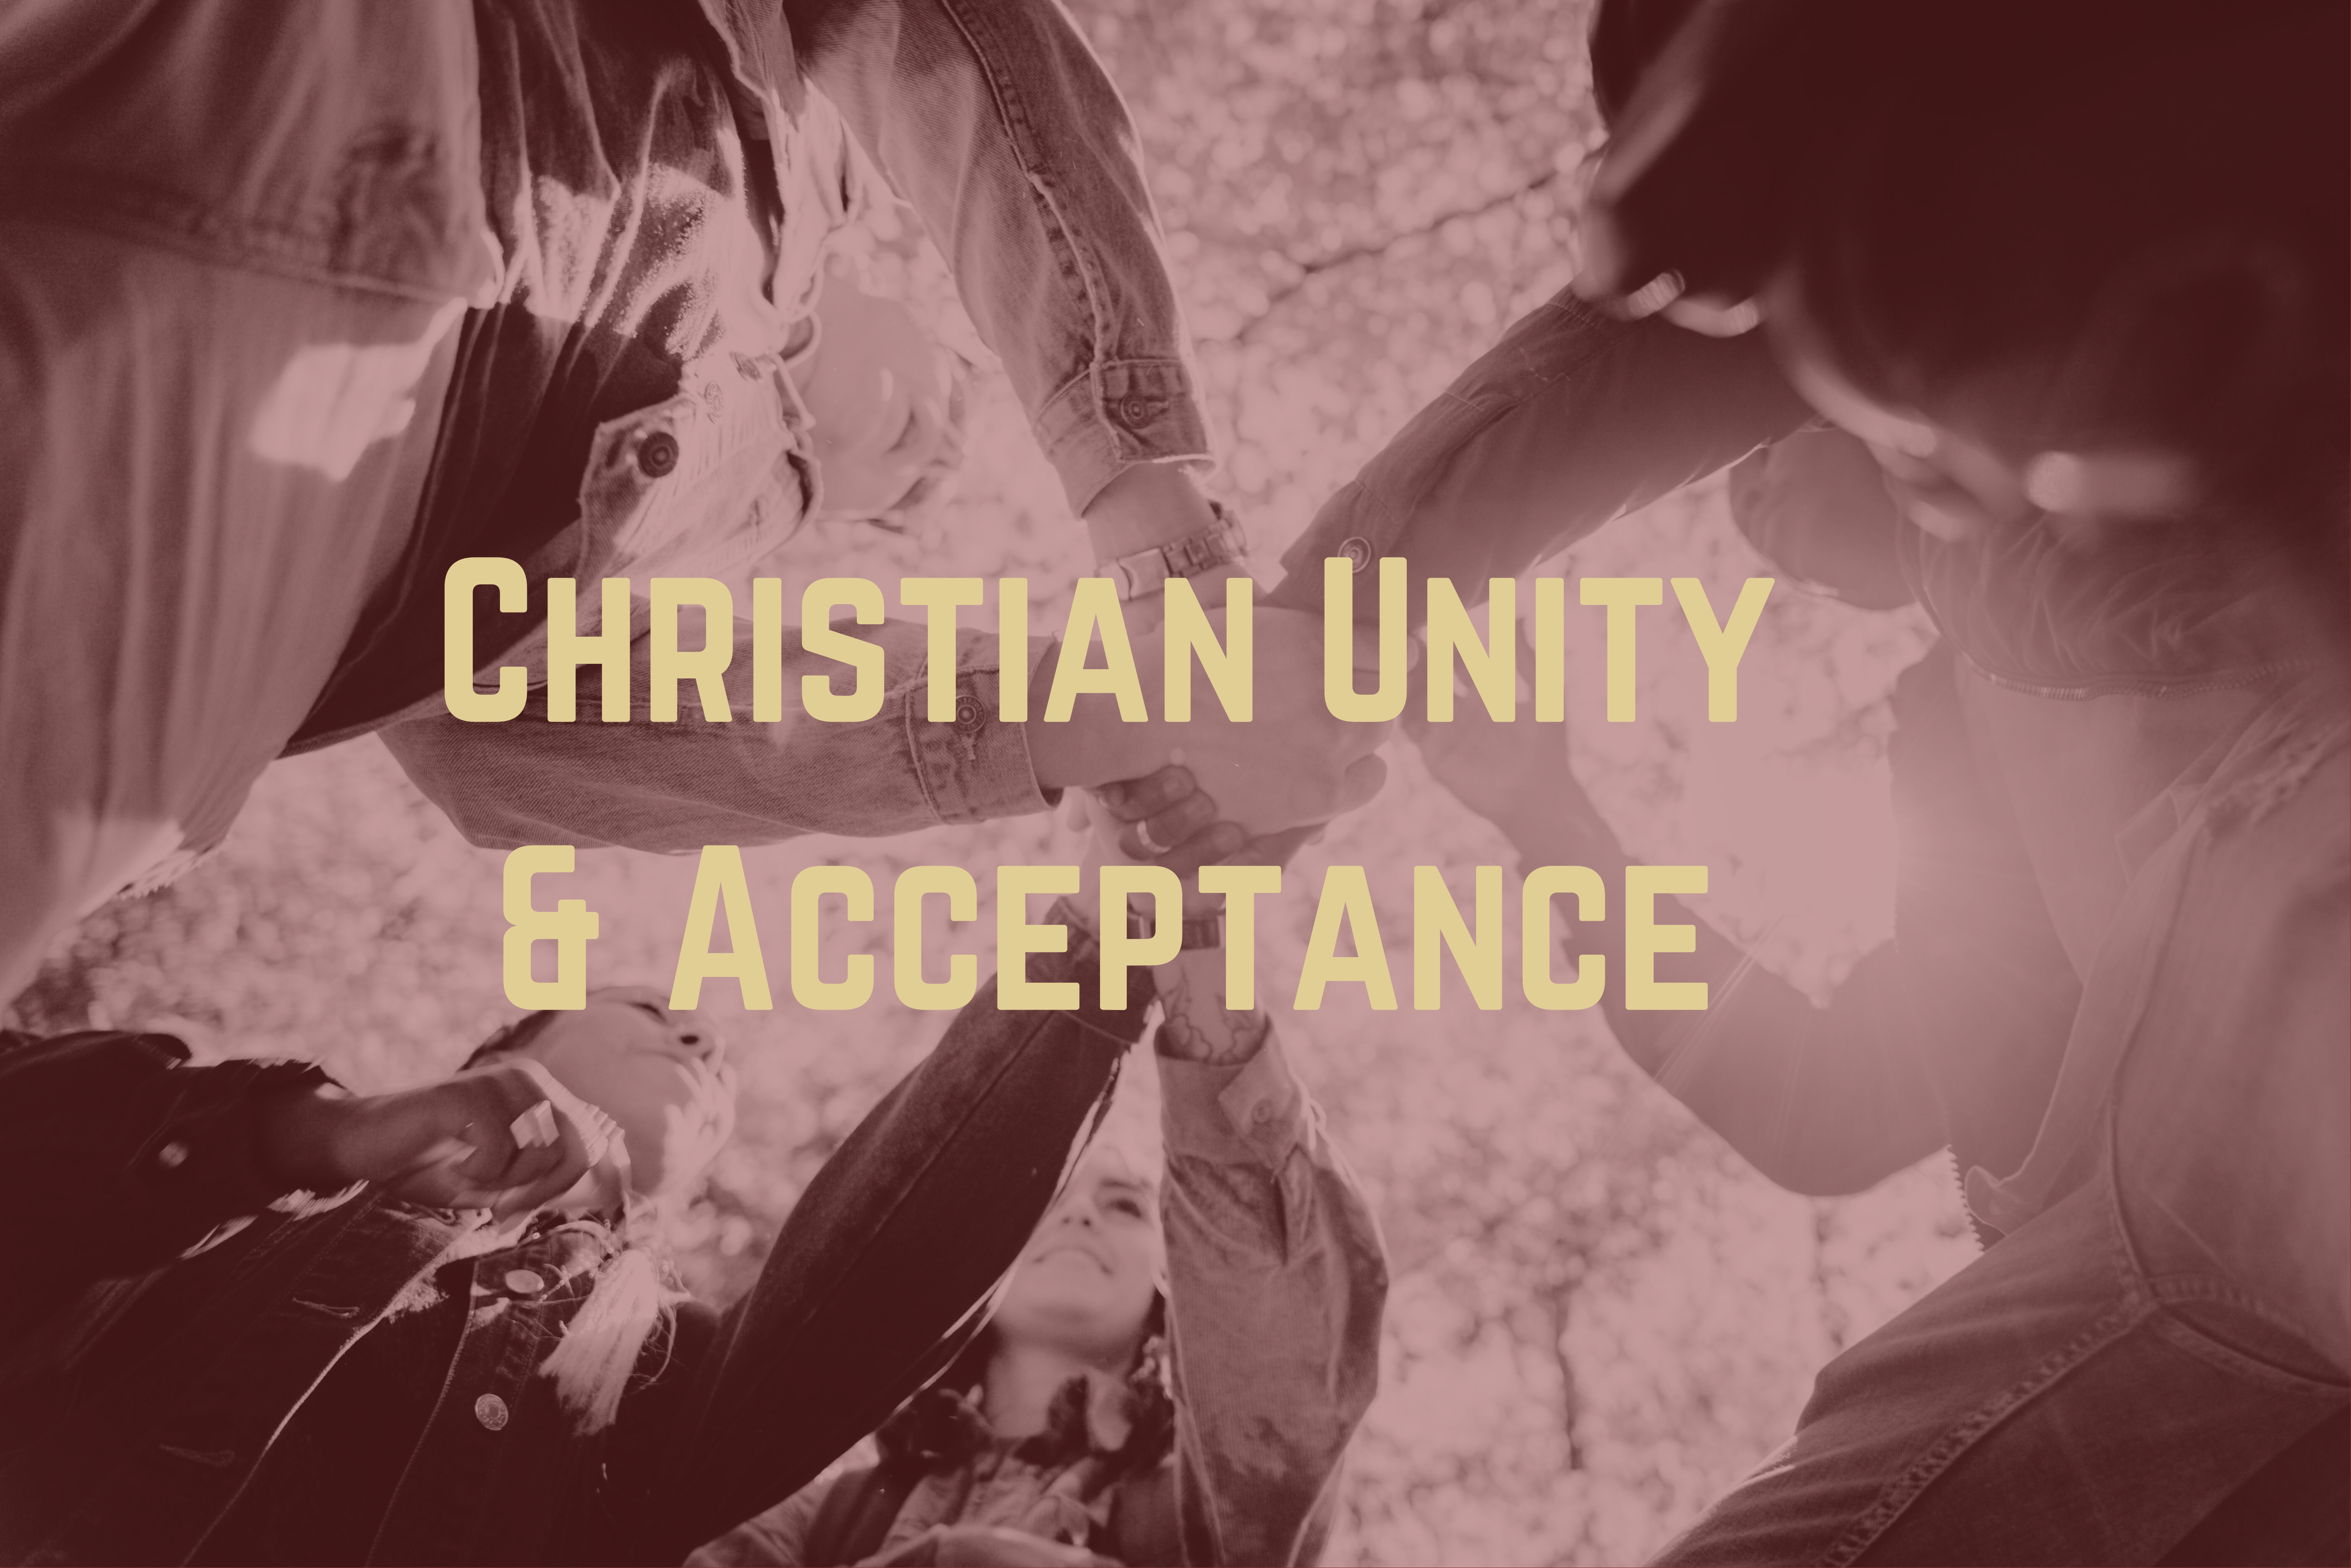 Christian Unity and Acceptance